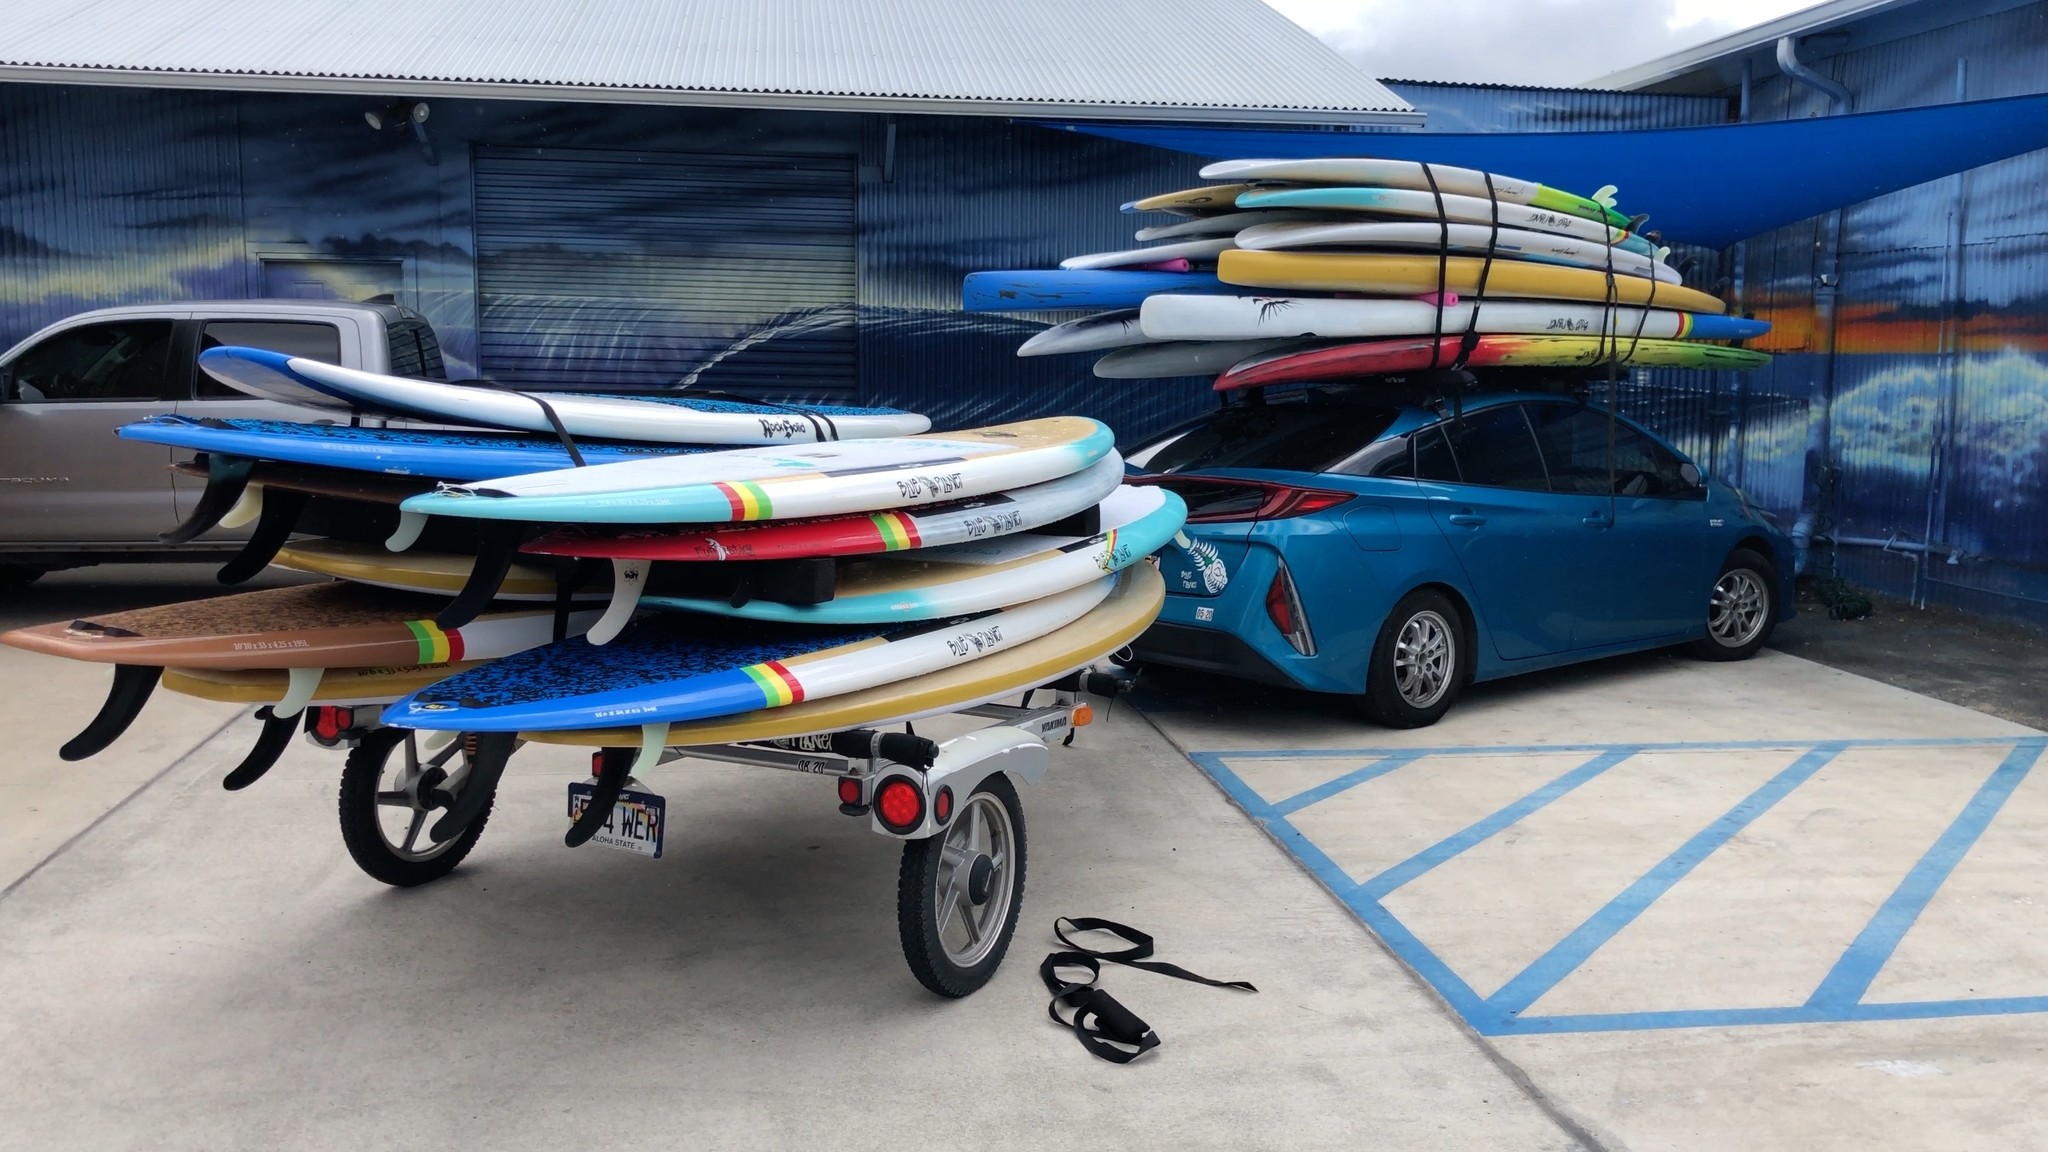 prius loaded with SUP board how to attach it to car